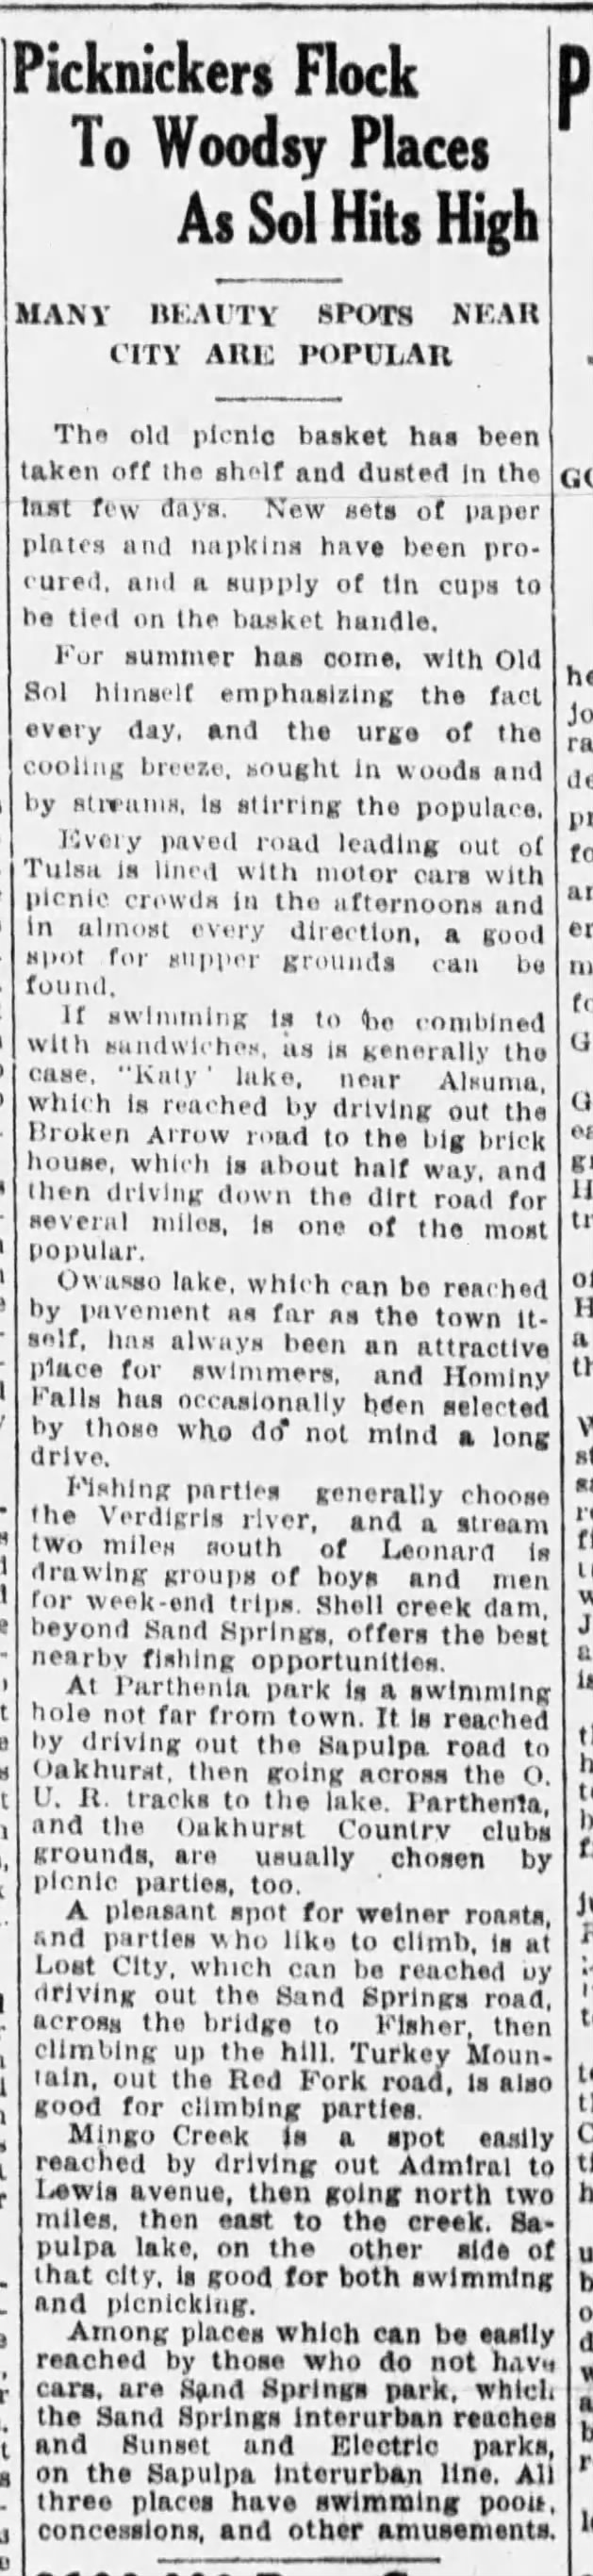 June 25, 1923, Tulsa Tribune article on summer picnic and swimming spots